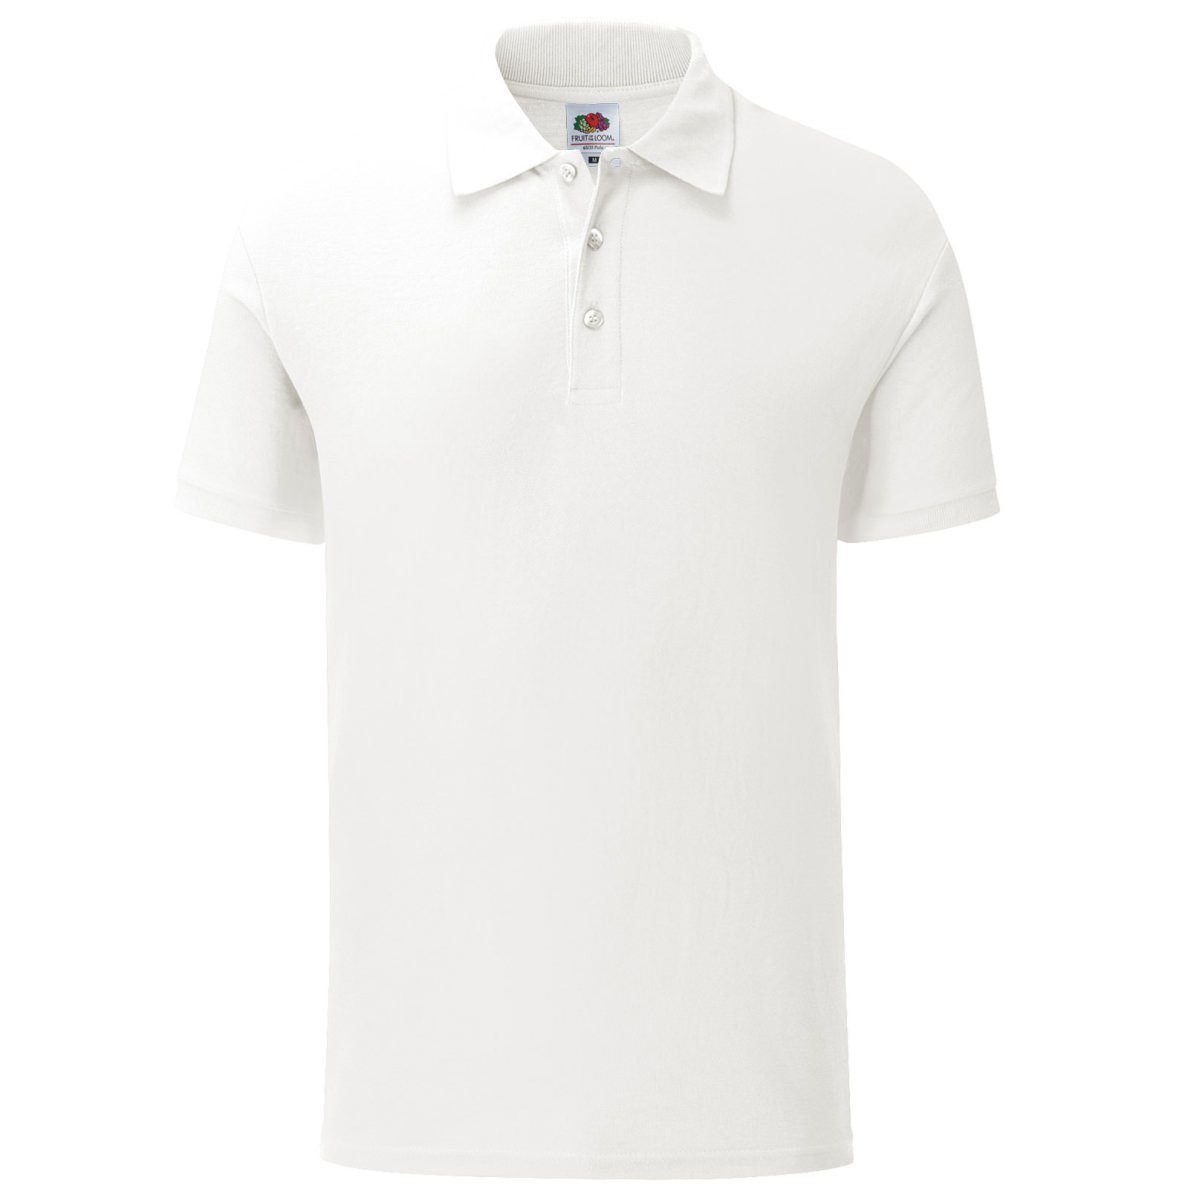 Fruit of the Loom Poloshirt Fruit of the Loom 65/35 Tailored Fit weiß